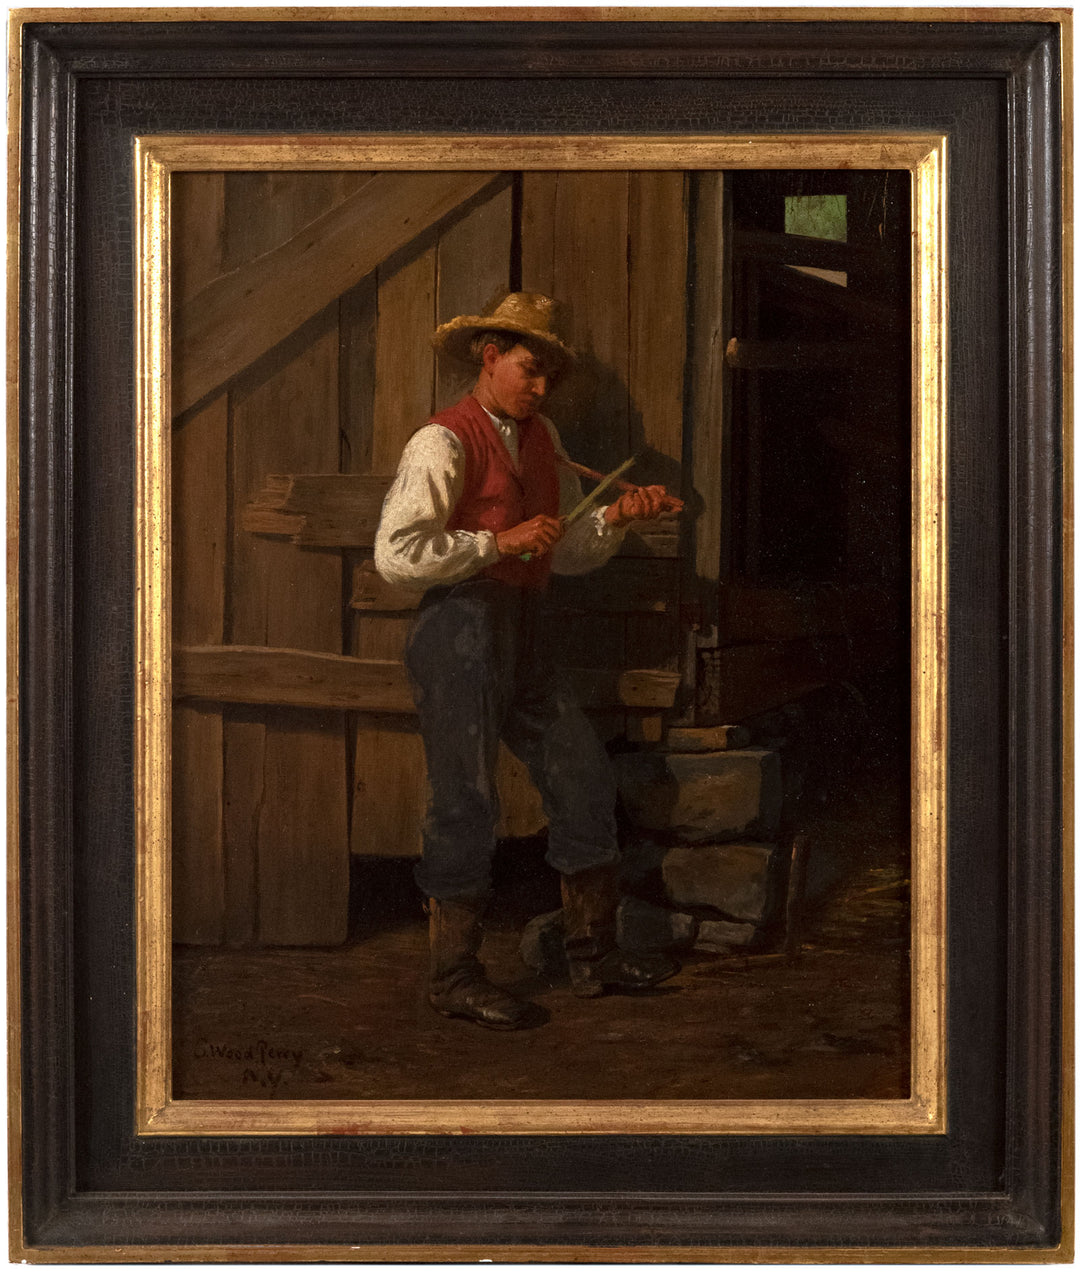 Whittling Gentleman by Enoch Wood Perry